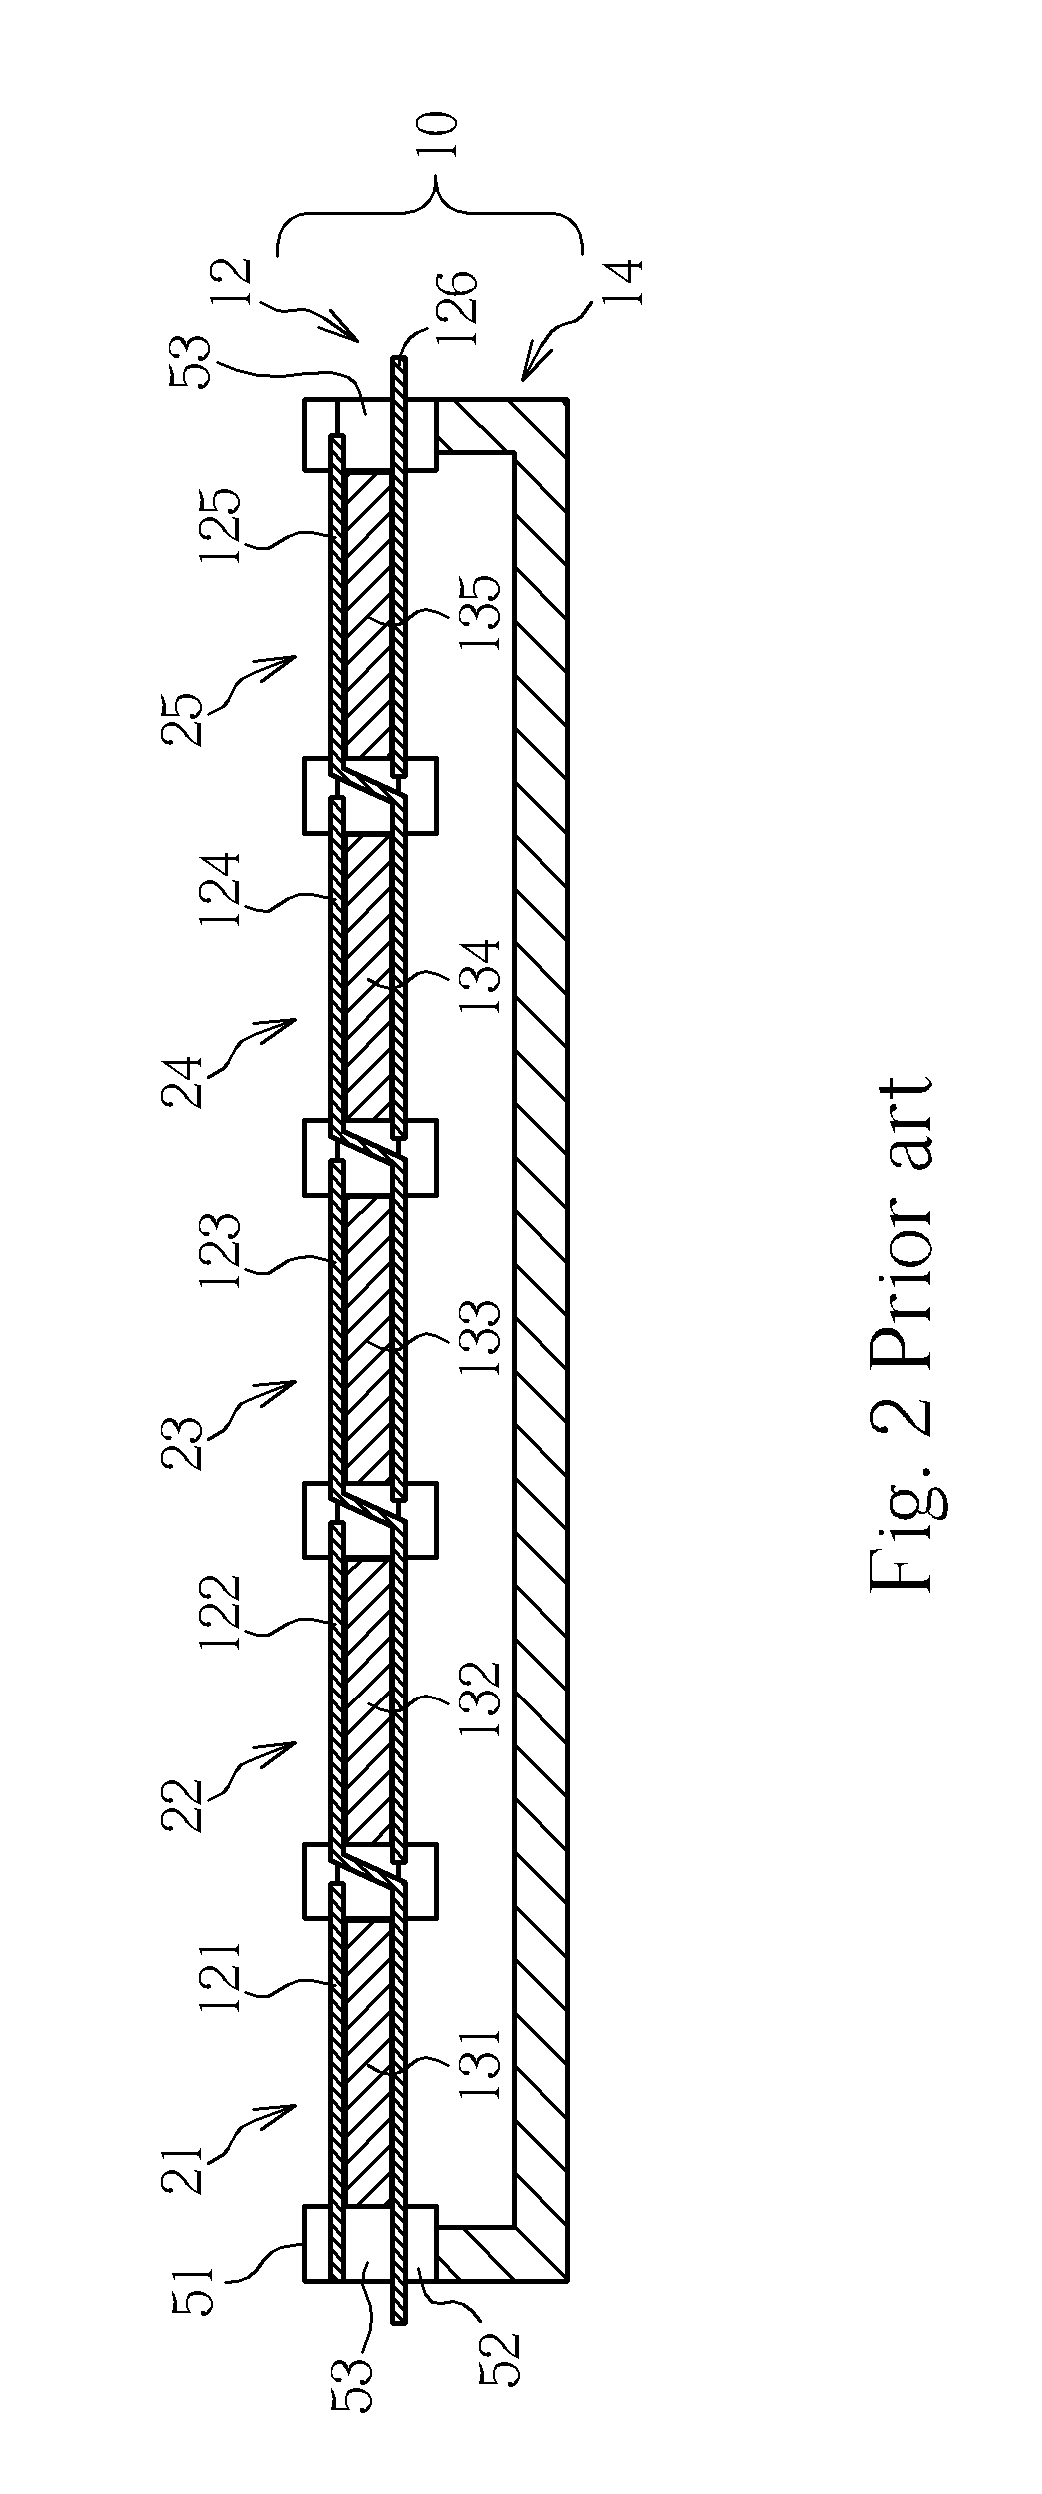 Flat panel direct methanol fuel cell and method for making the same